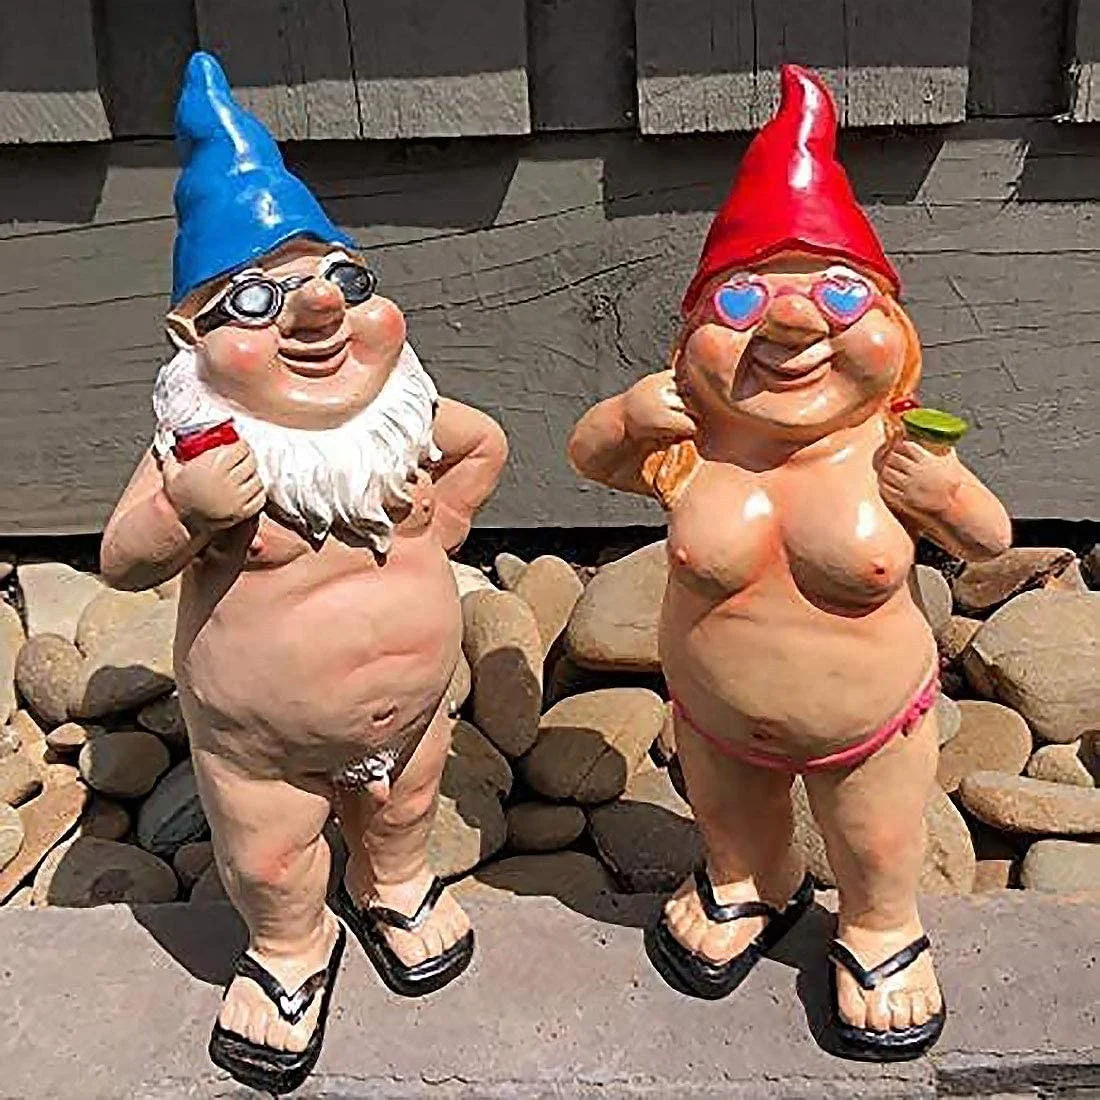 2 Pcs Garden Goblin-Art Decoration Peeing Gnome Naughty Gnome Statue Ornament Funny Garden Gnome for Lawn Ornament Naked Drinking Gnome Outdoor Statue